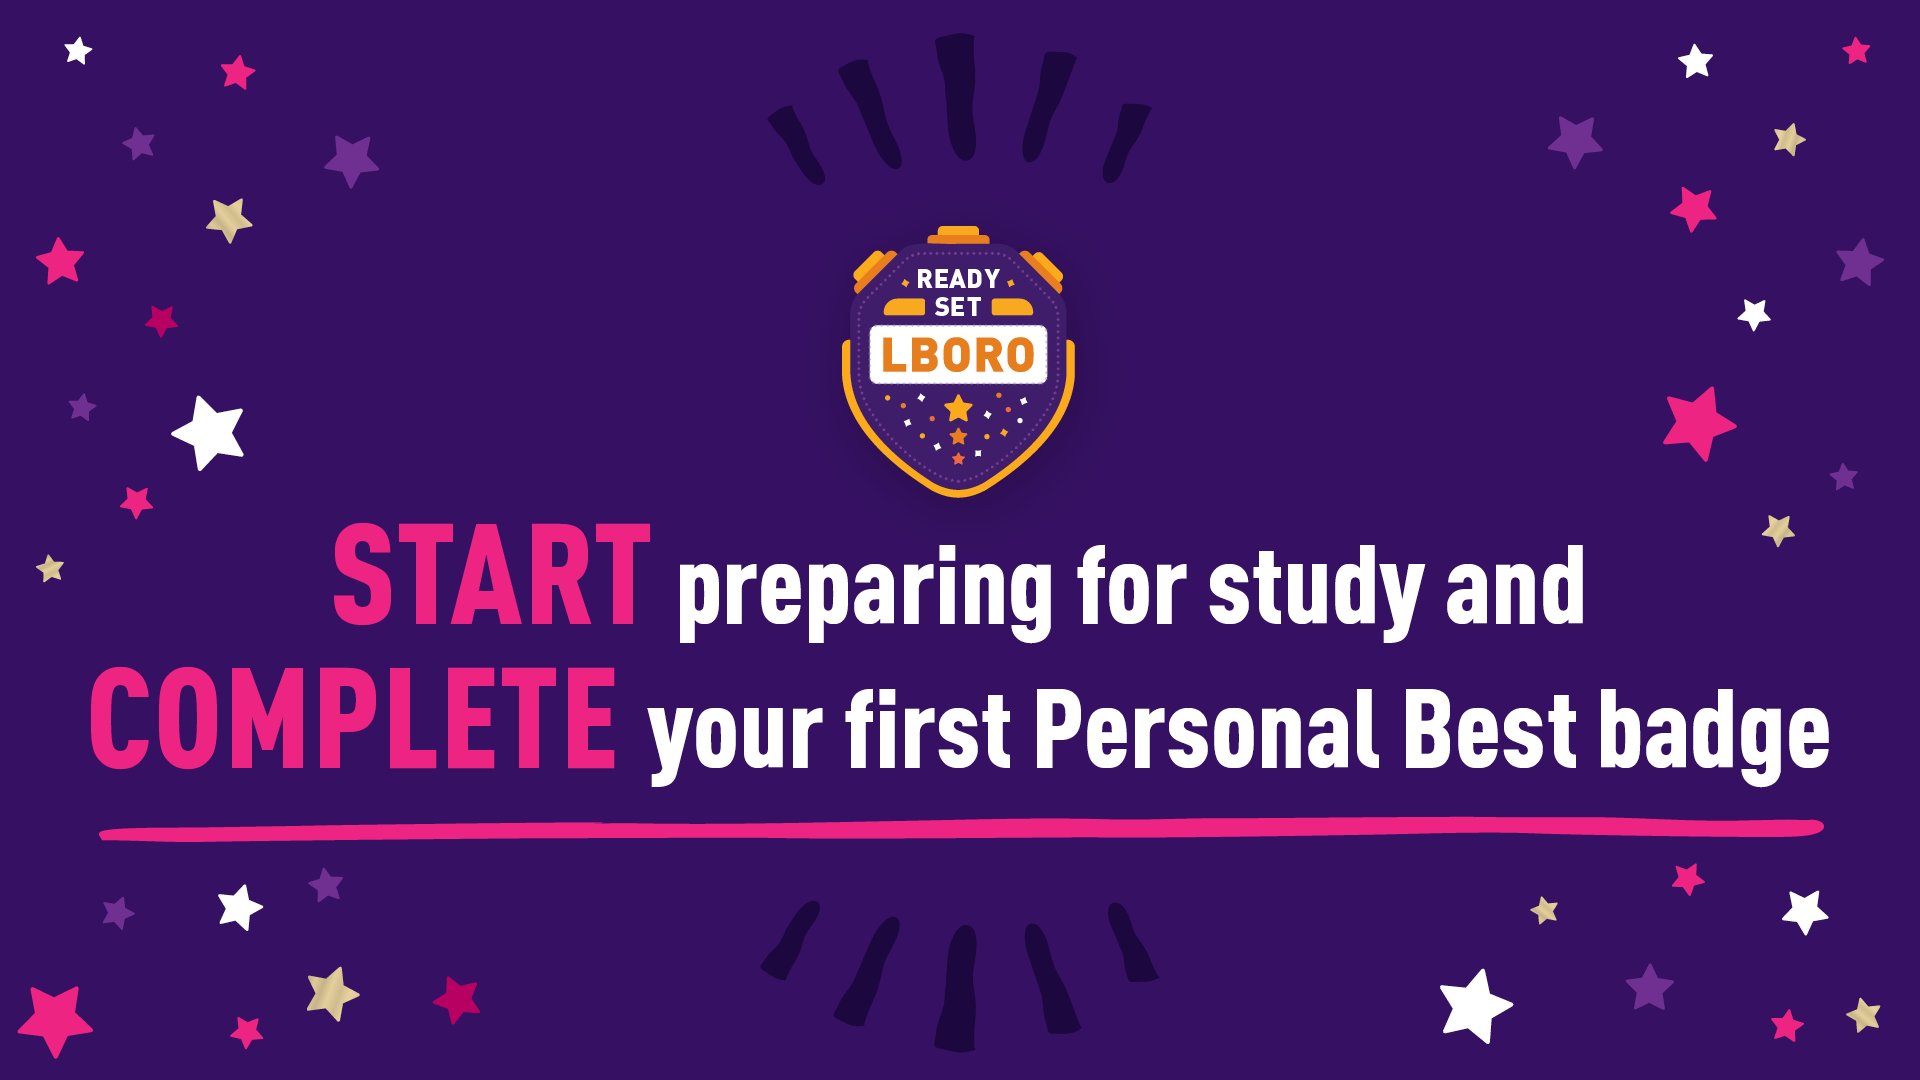 Start preparing for study and complete your first Personal Best badge.